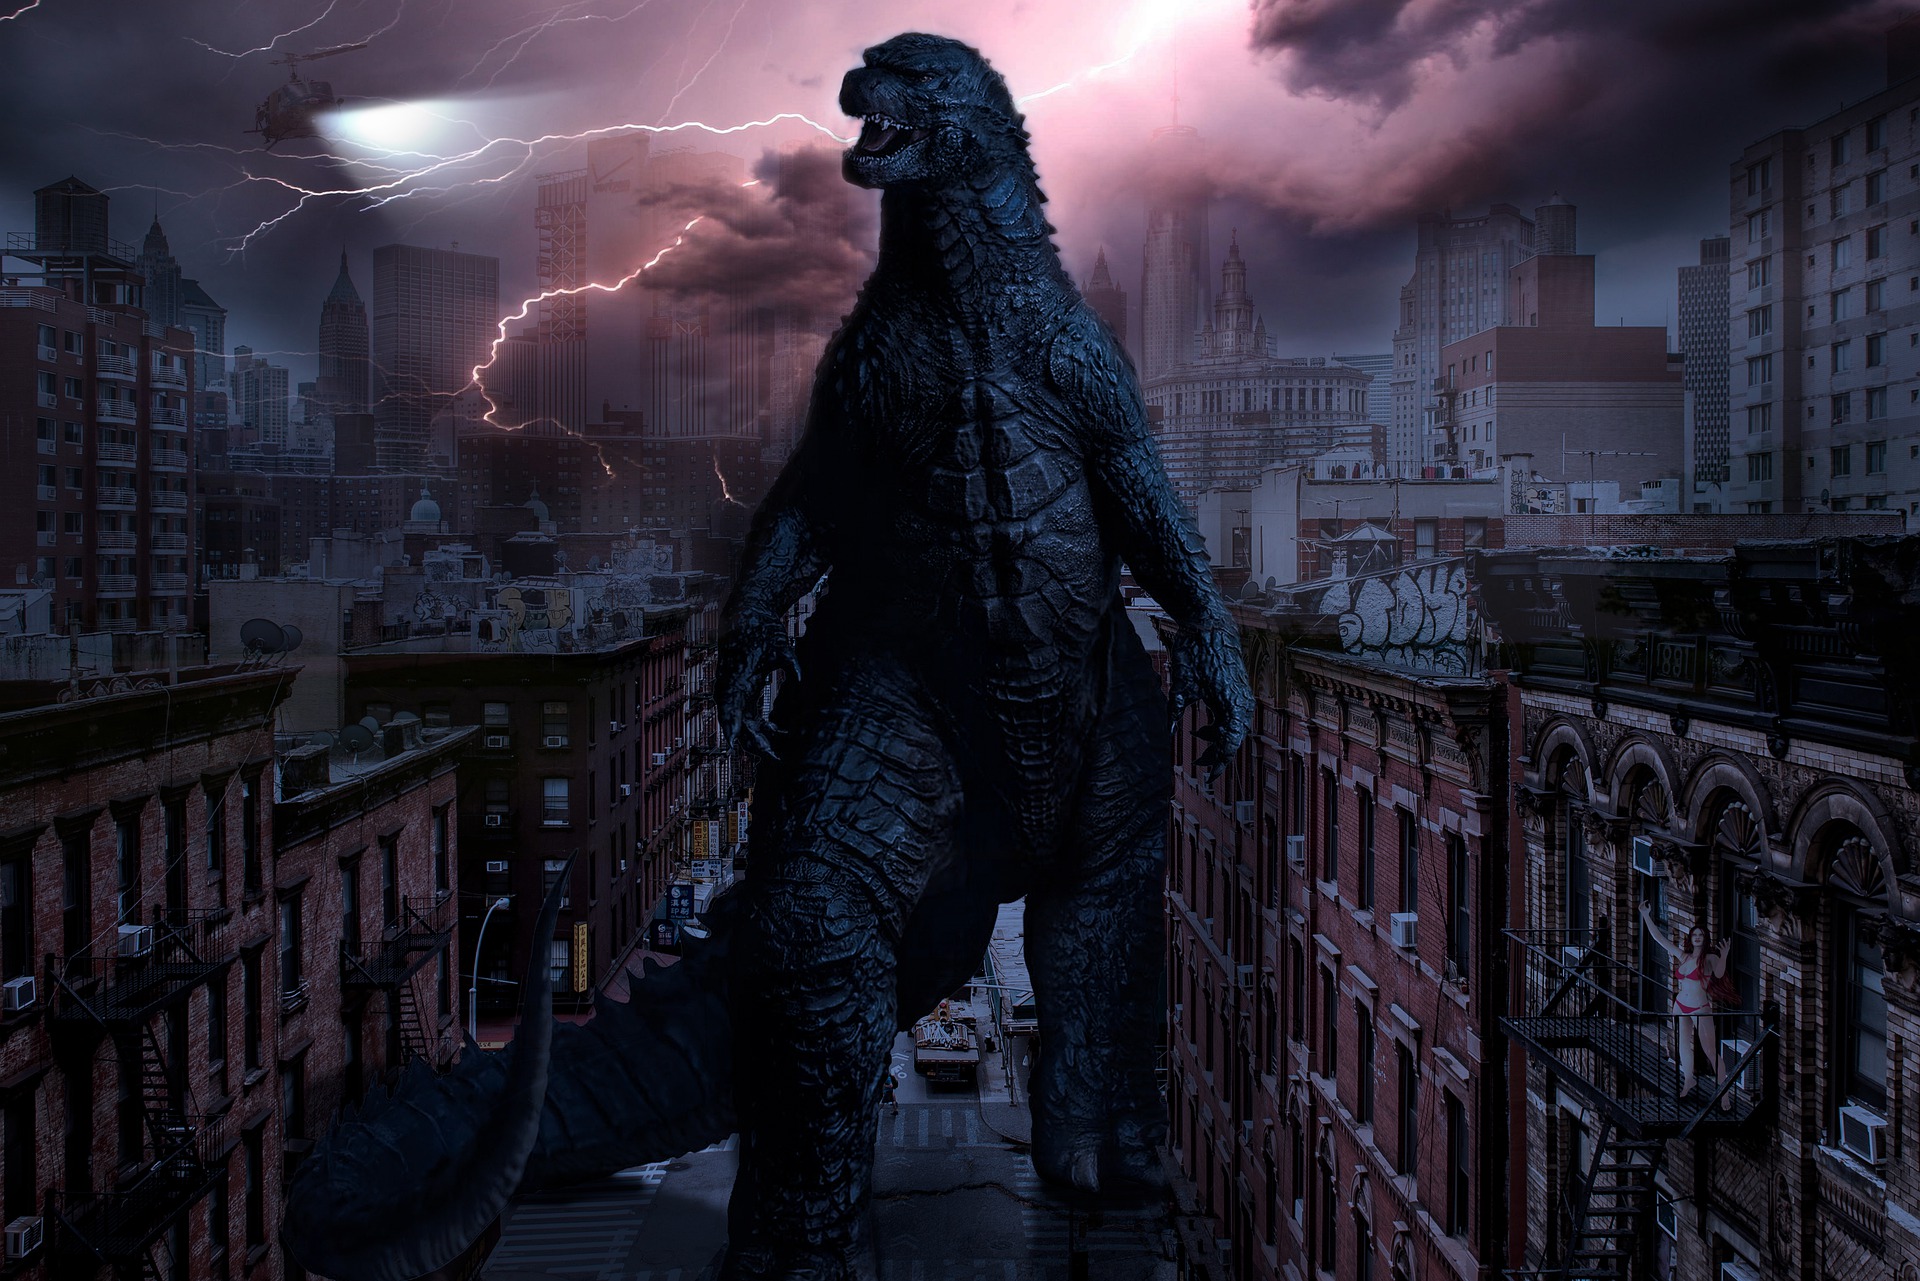 Diary of a private banker: Why Citi wants to be the Godzilla of private banking